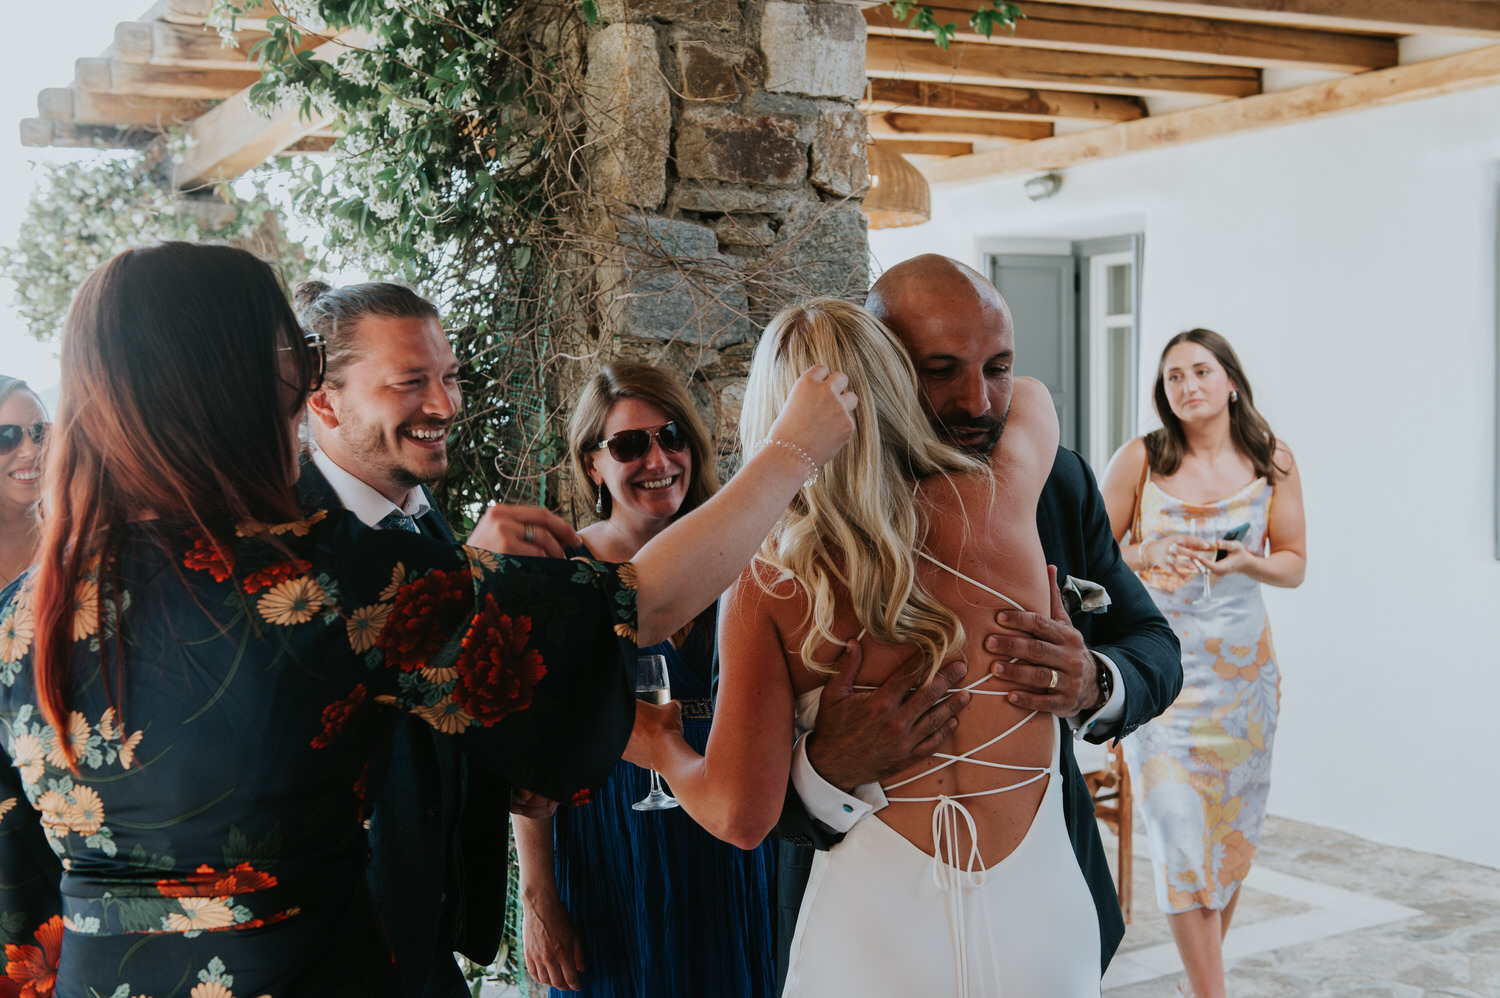 Mykonos wedding photographer: bride with her lace up back of the dress hugging a guest surrounded by other smiling faces.